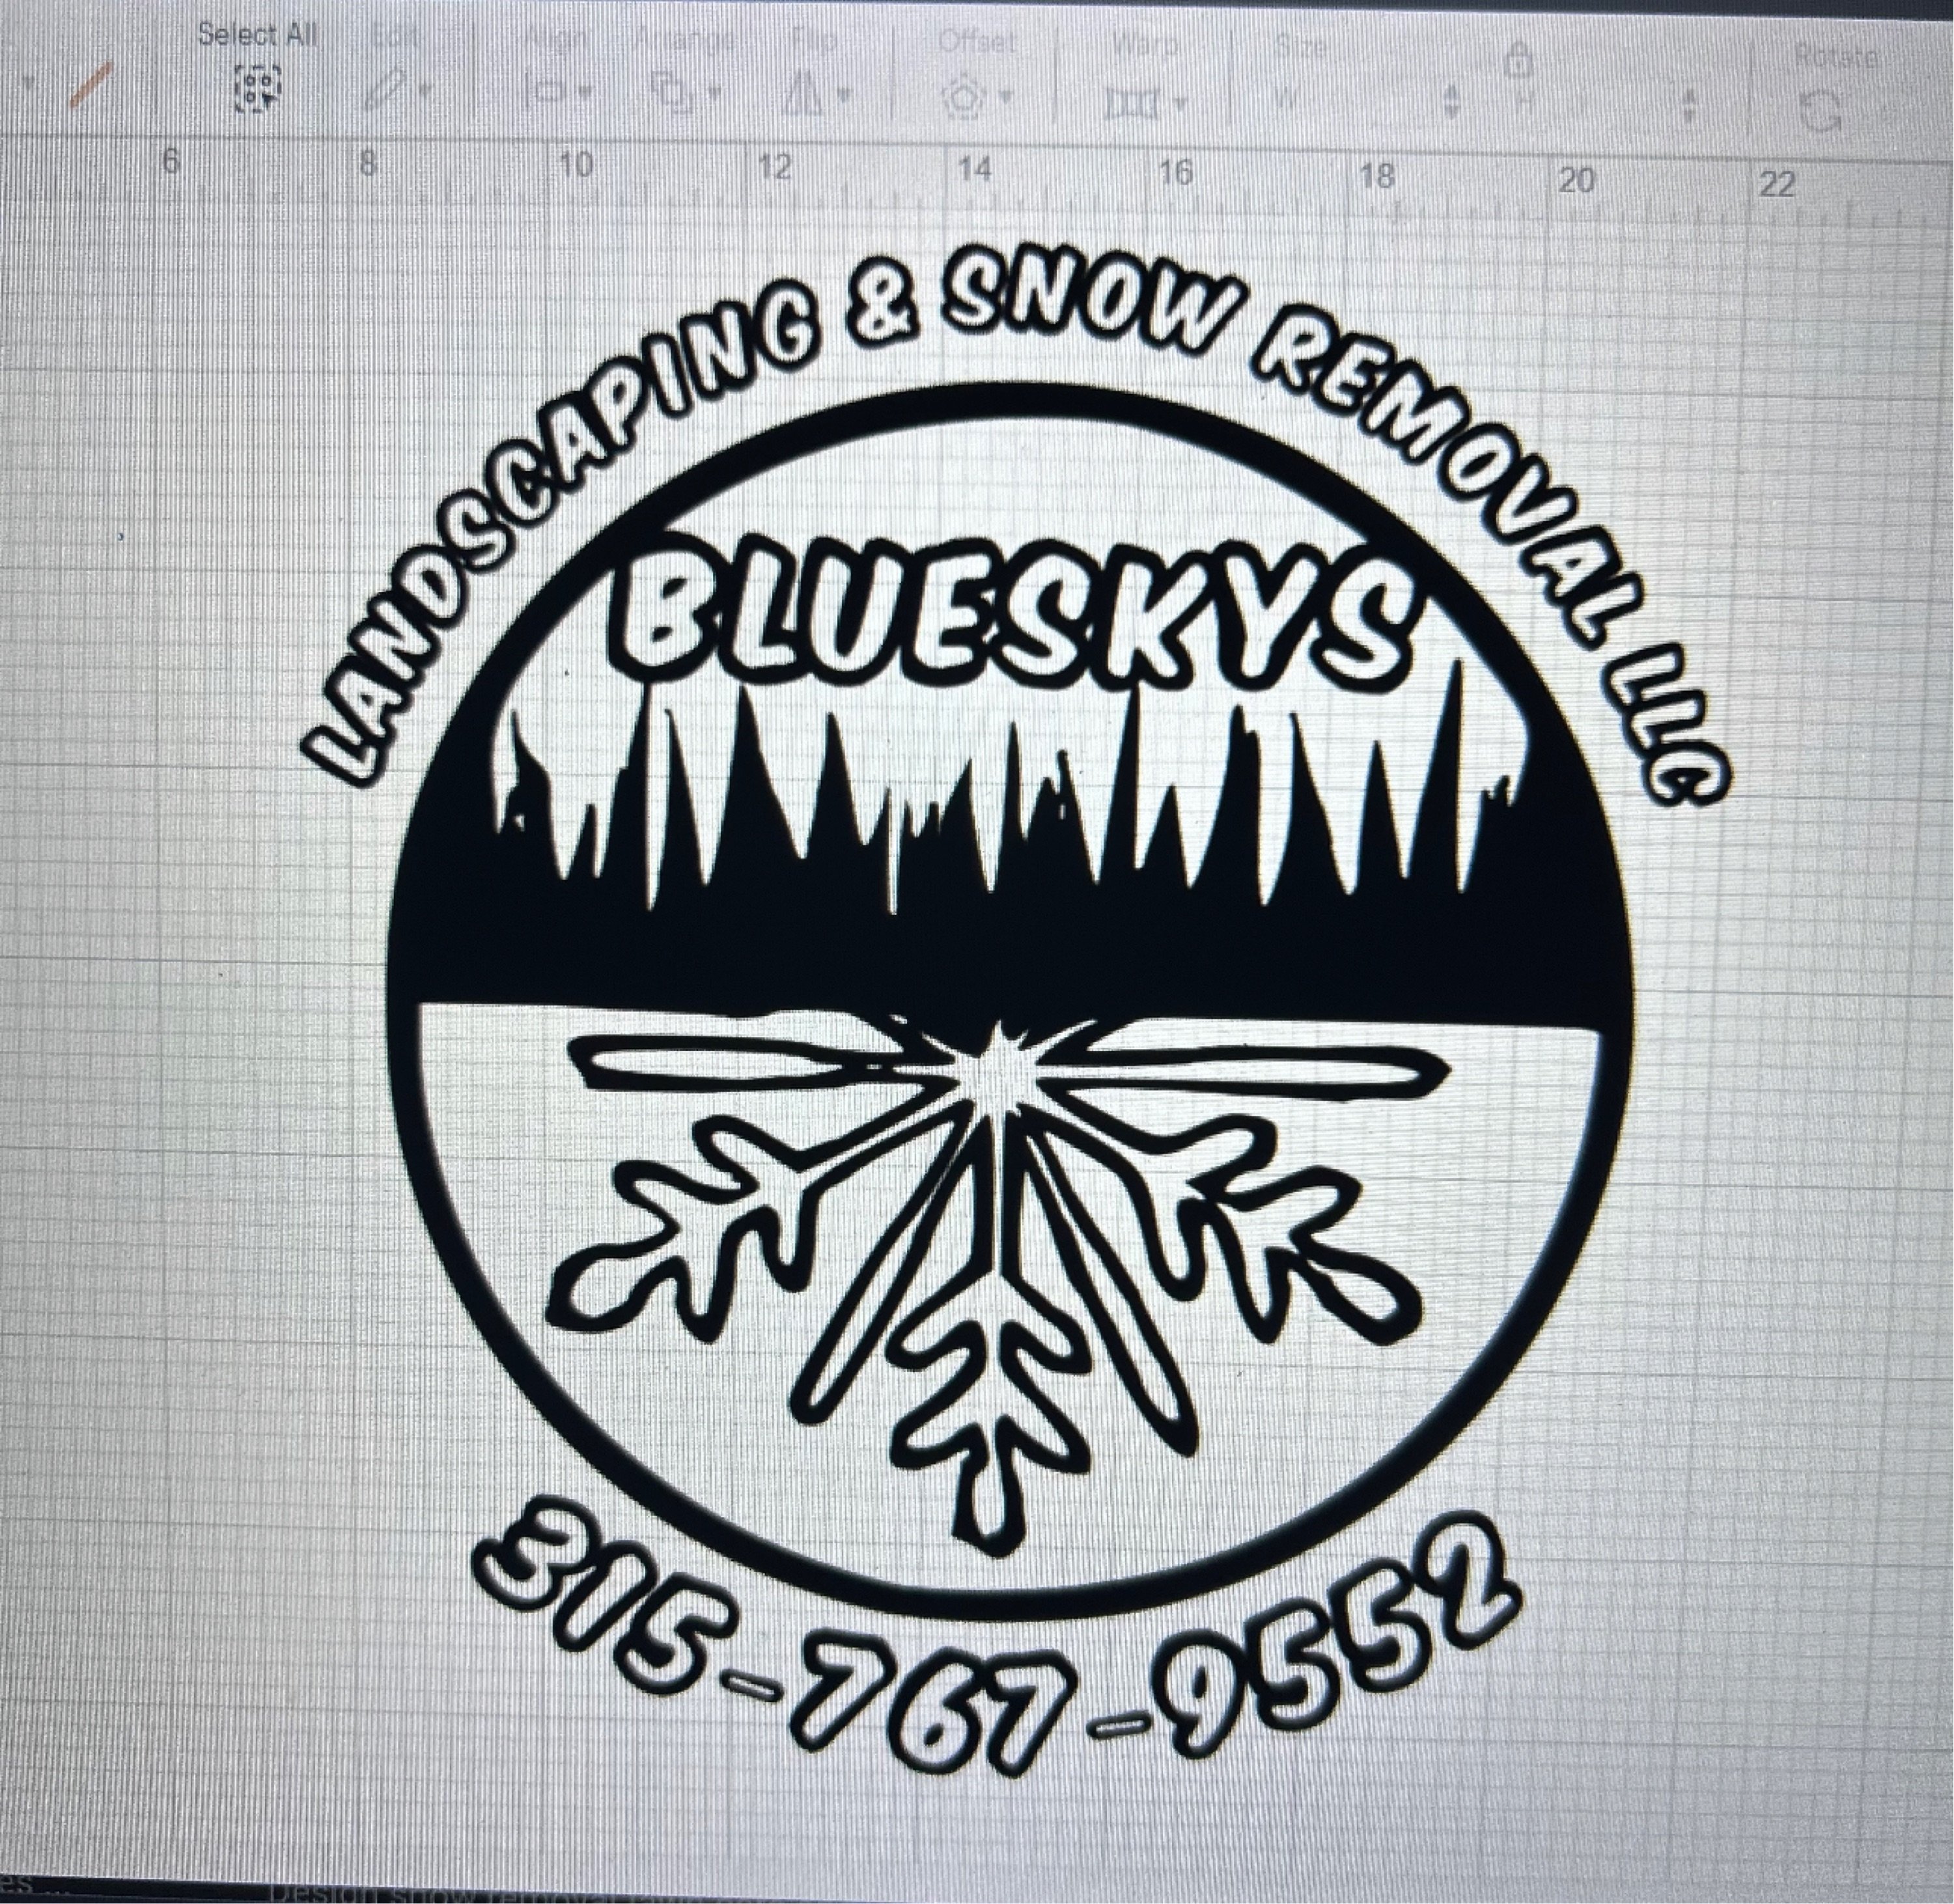 Blue Skies Landscaping and Snow Removal Logo